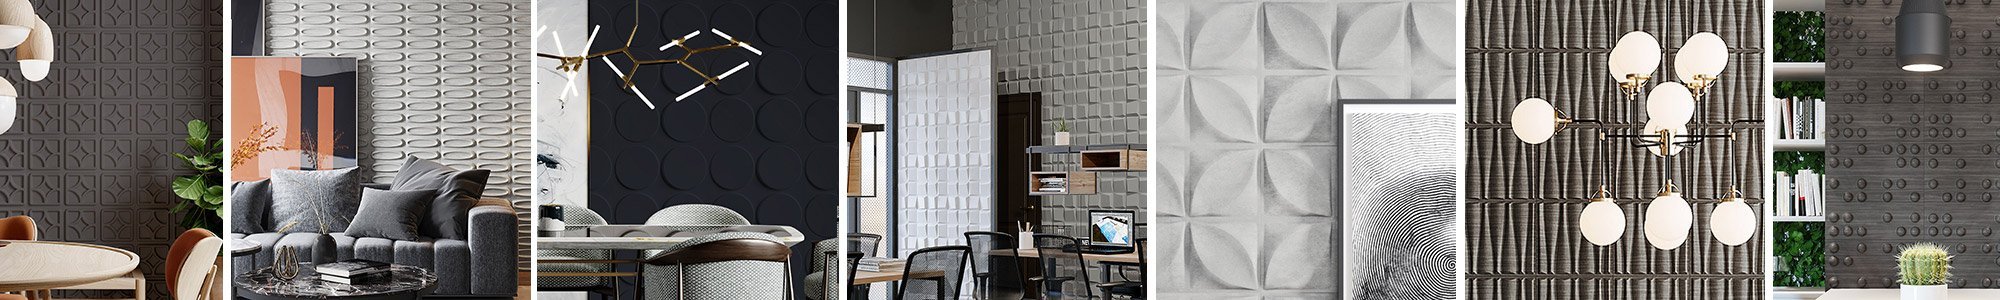 3D Wall Panel Feature Wall | Inhabit